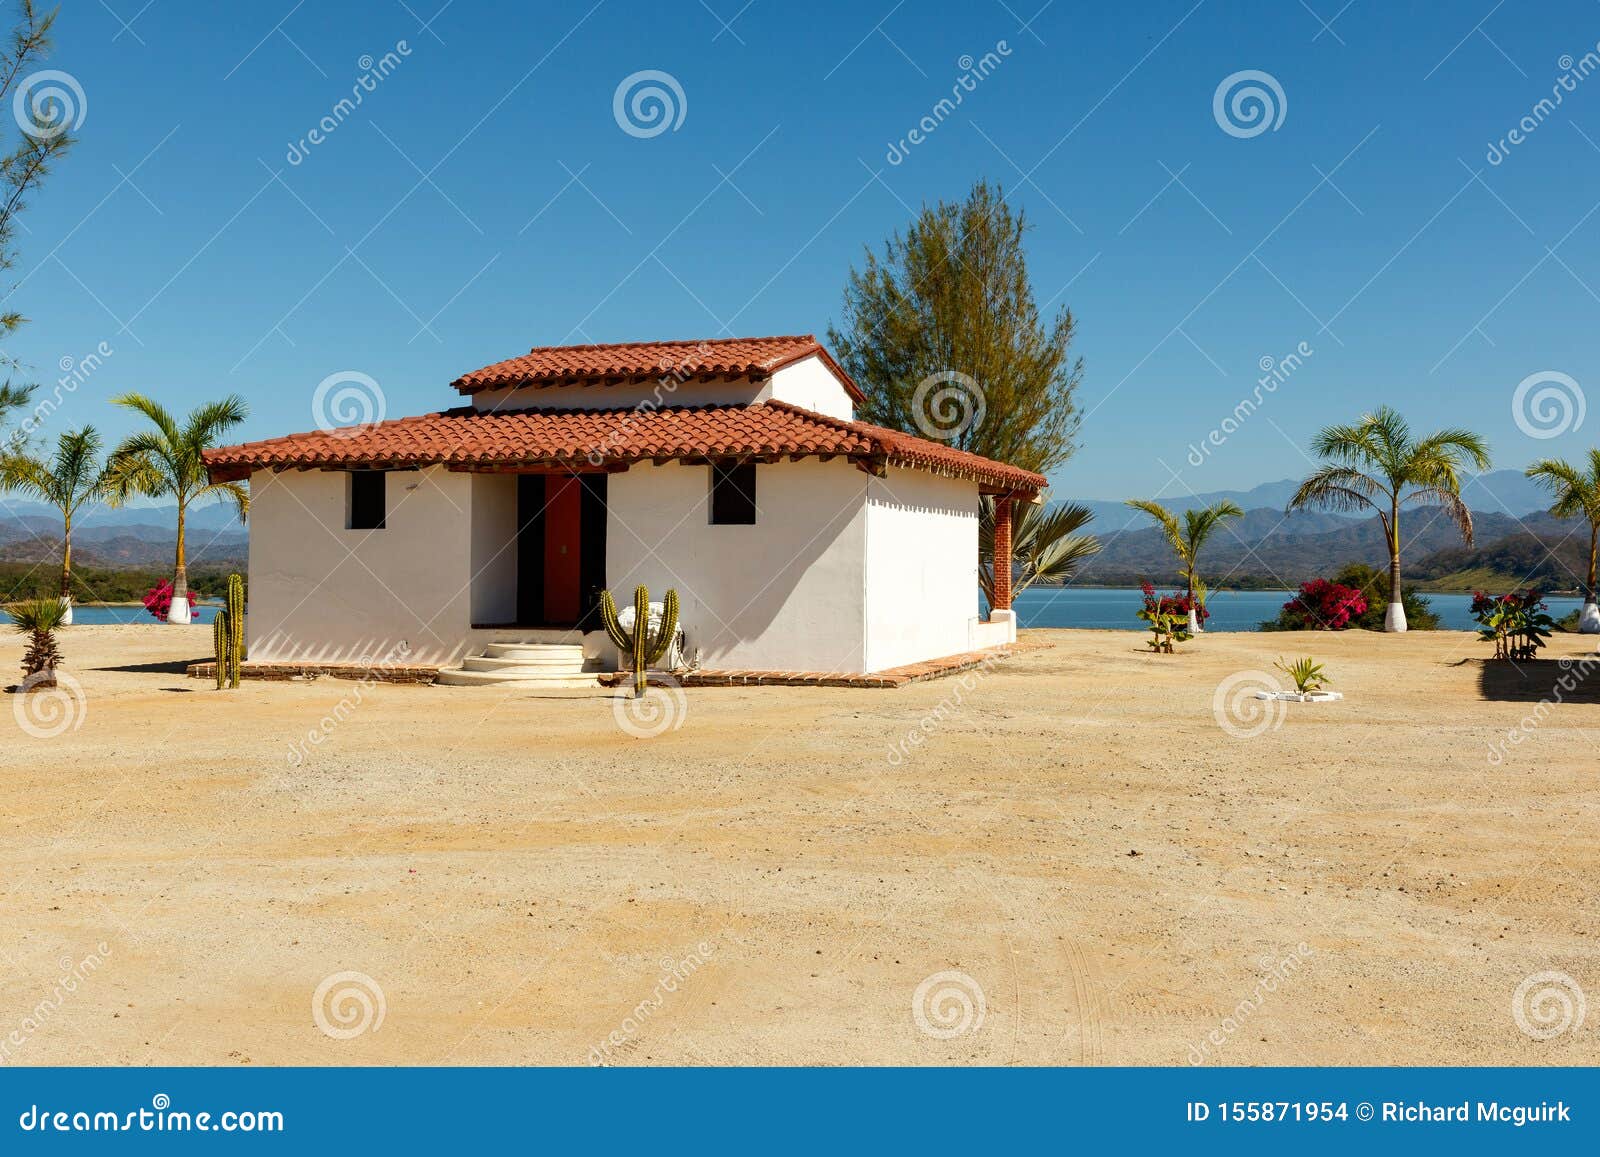 White Stucco House With A Red Clay Tile Roof Stock Photo Image of mouth, dirt 155871954